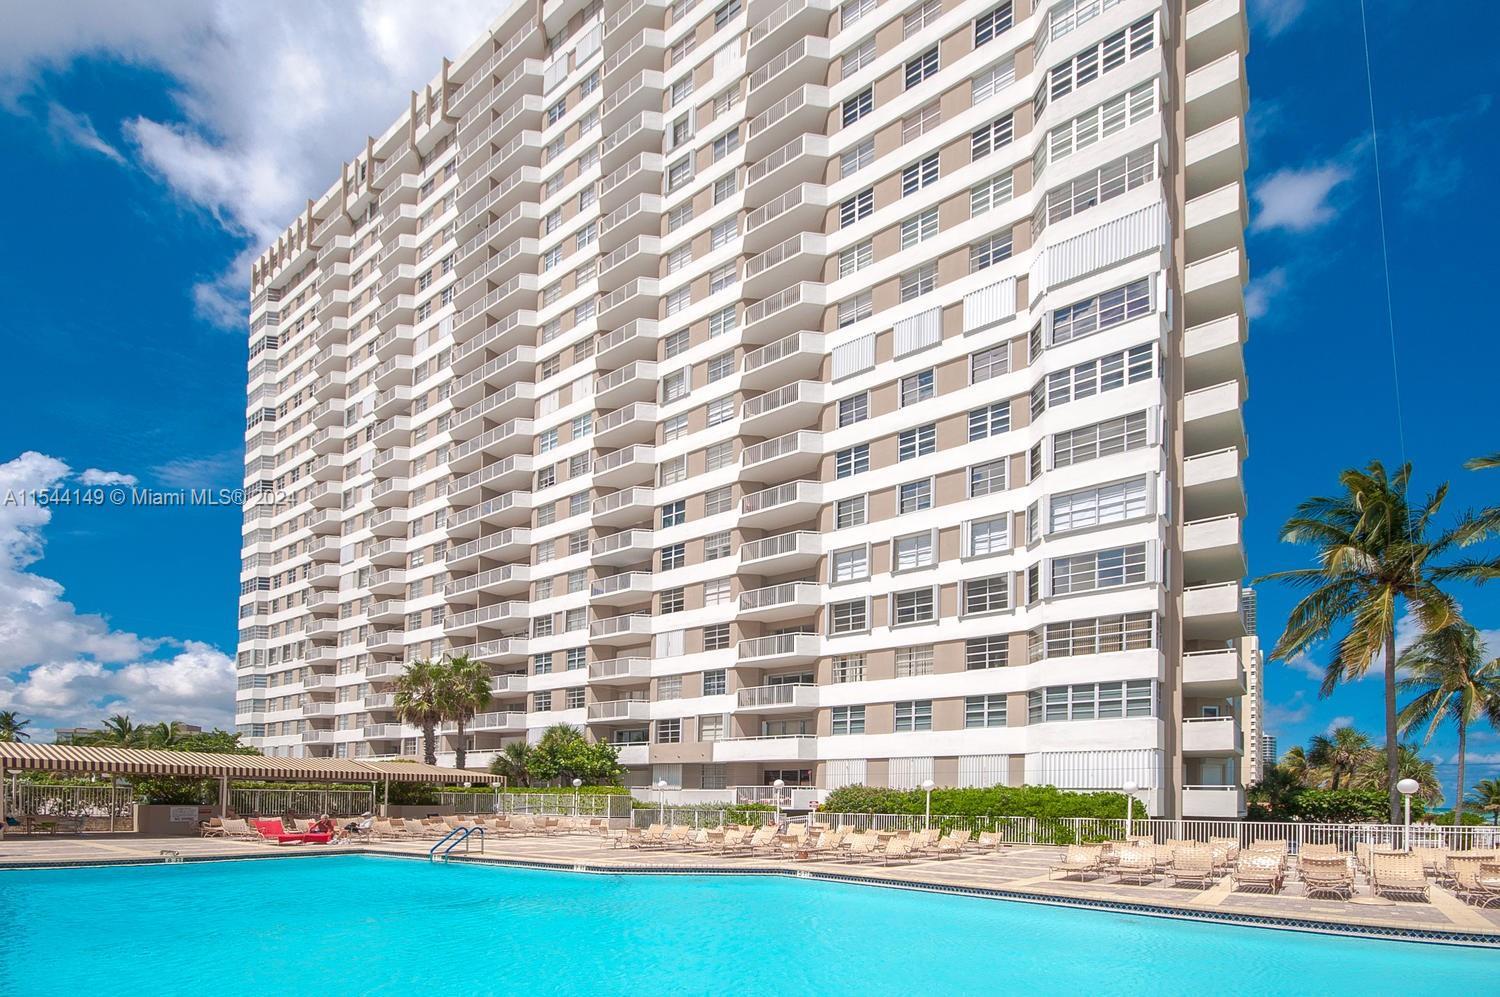 Photo of 1980 S Ocean Dr #15Q (Available June 1) in Hallandale Beach, FL